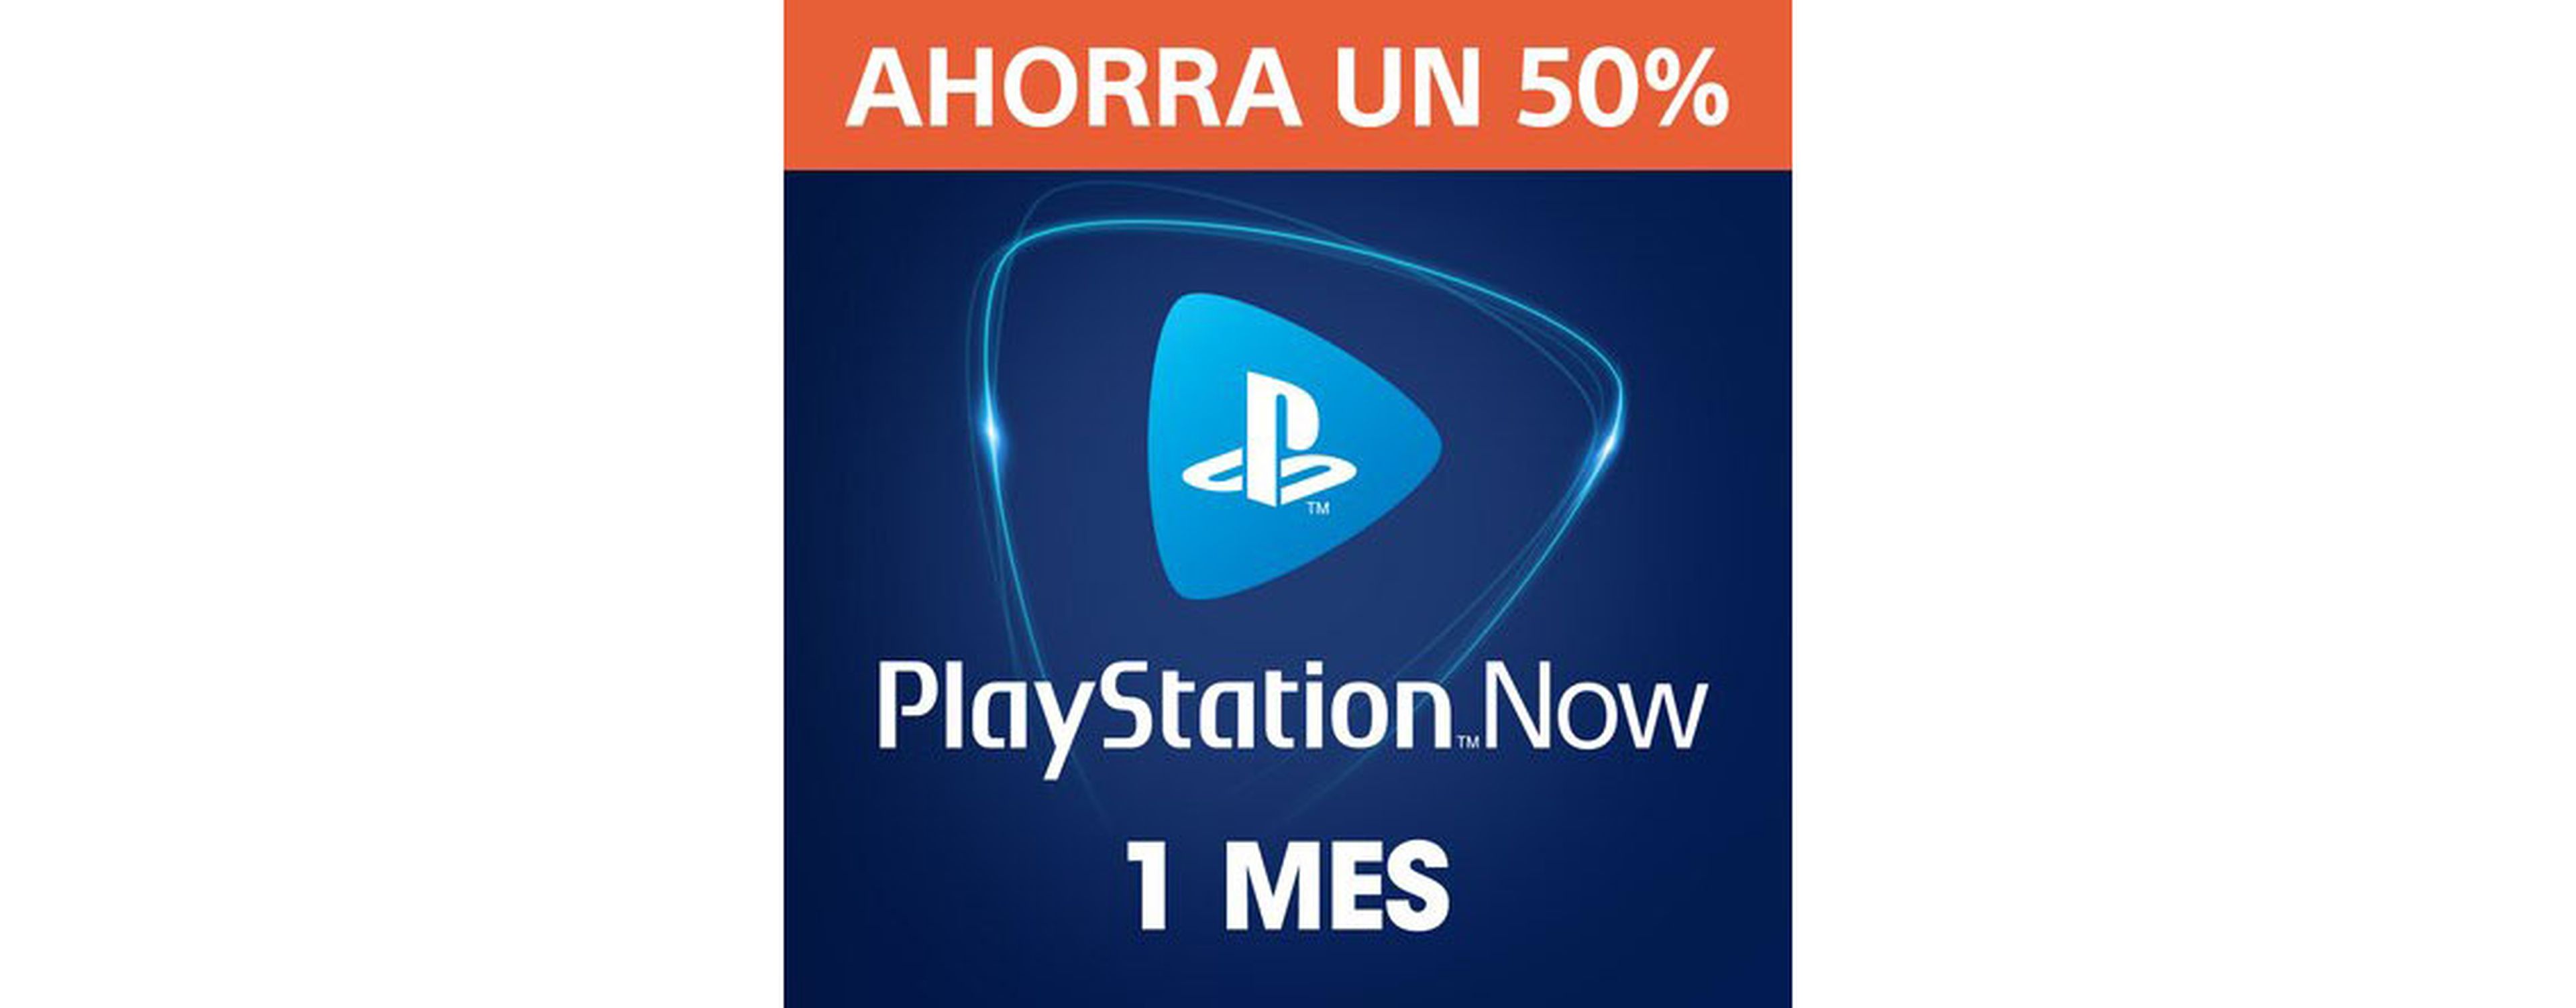 Promo PS Now 1 mes